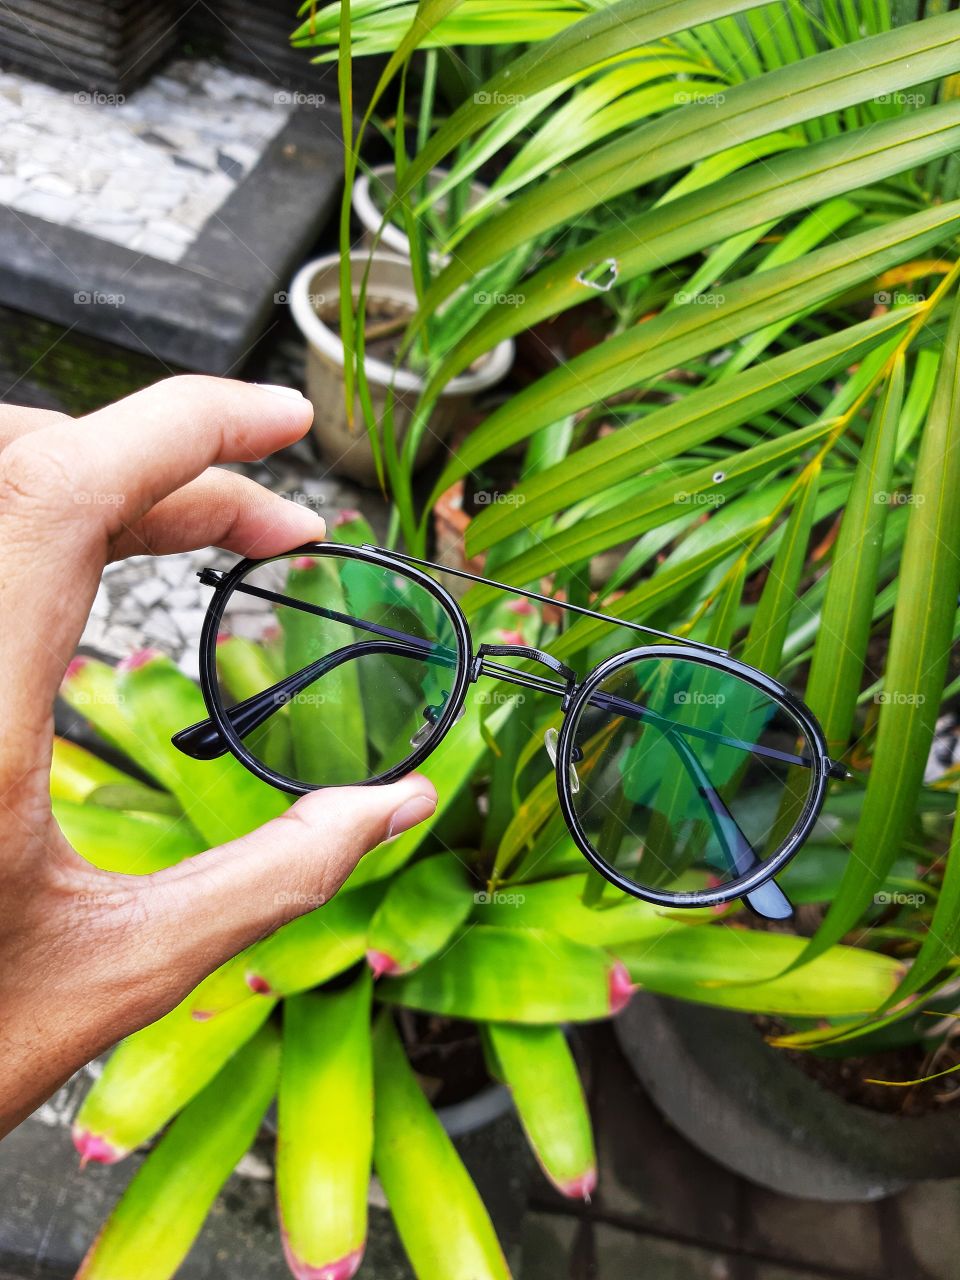 The glasses is hold by a hand in front of the plants